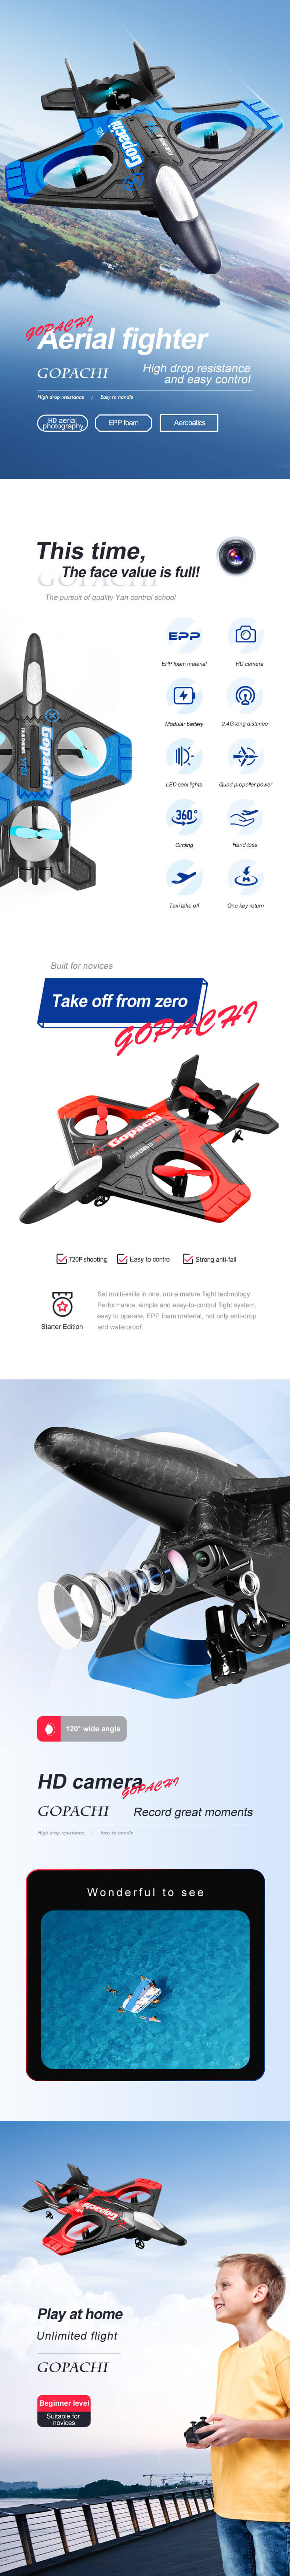 4DRC V25 RC aircraft Wifi with 720P camera 2.4G wireless remote control Model aeroplane toy children's gift